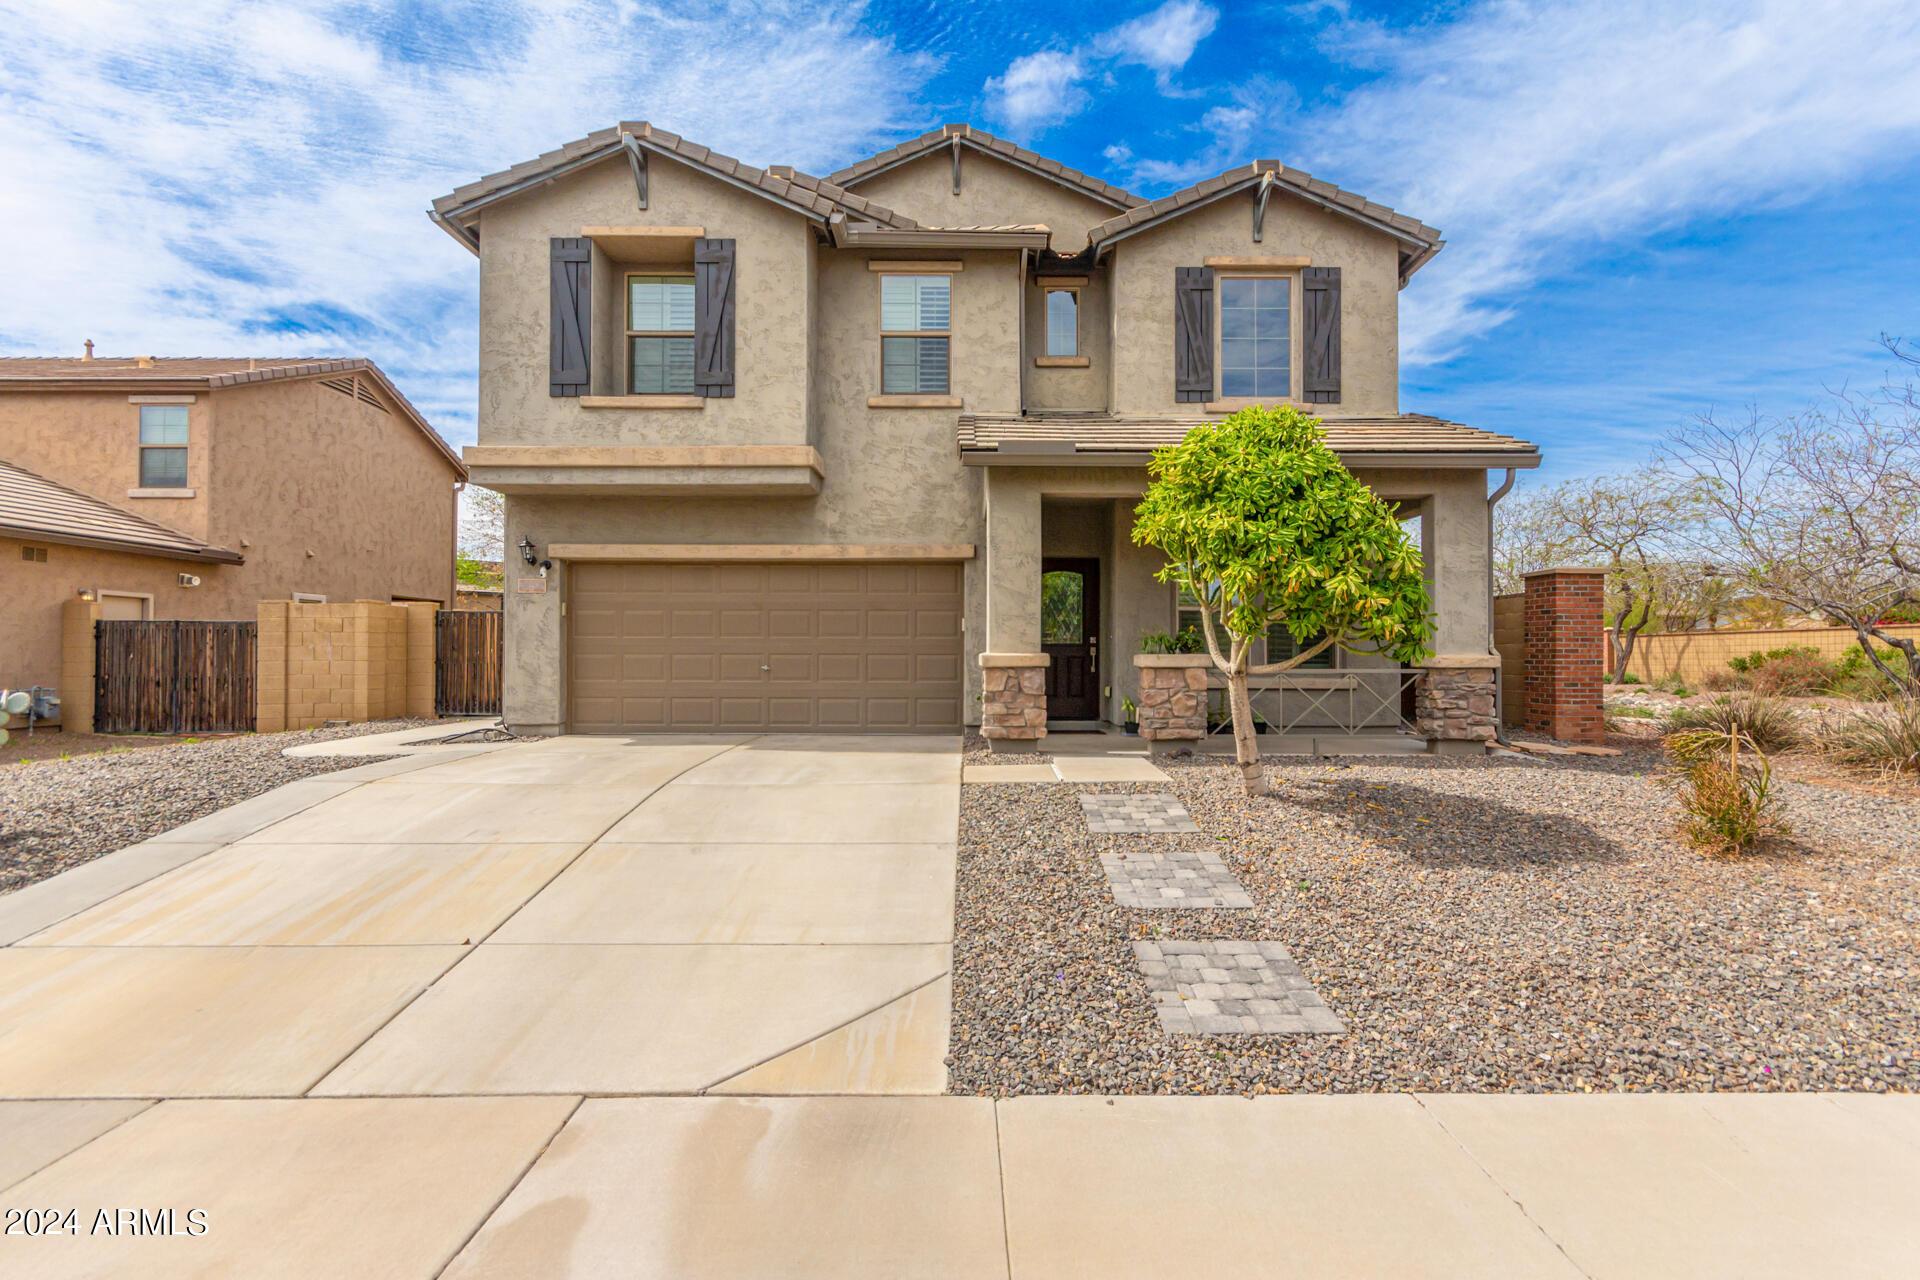 Photo one of 16228 N 73Rd Dr Peoria AZ 85382 | MLS 6682994